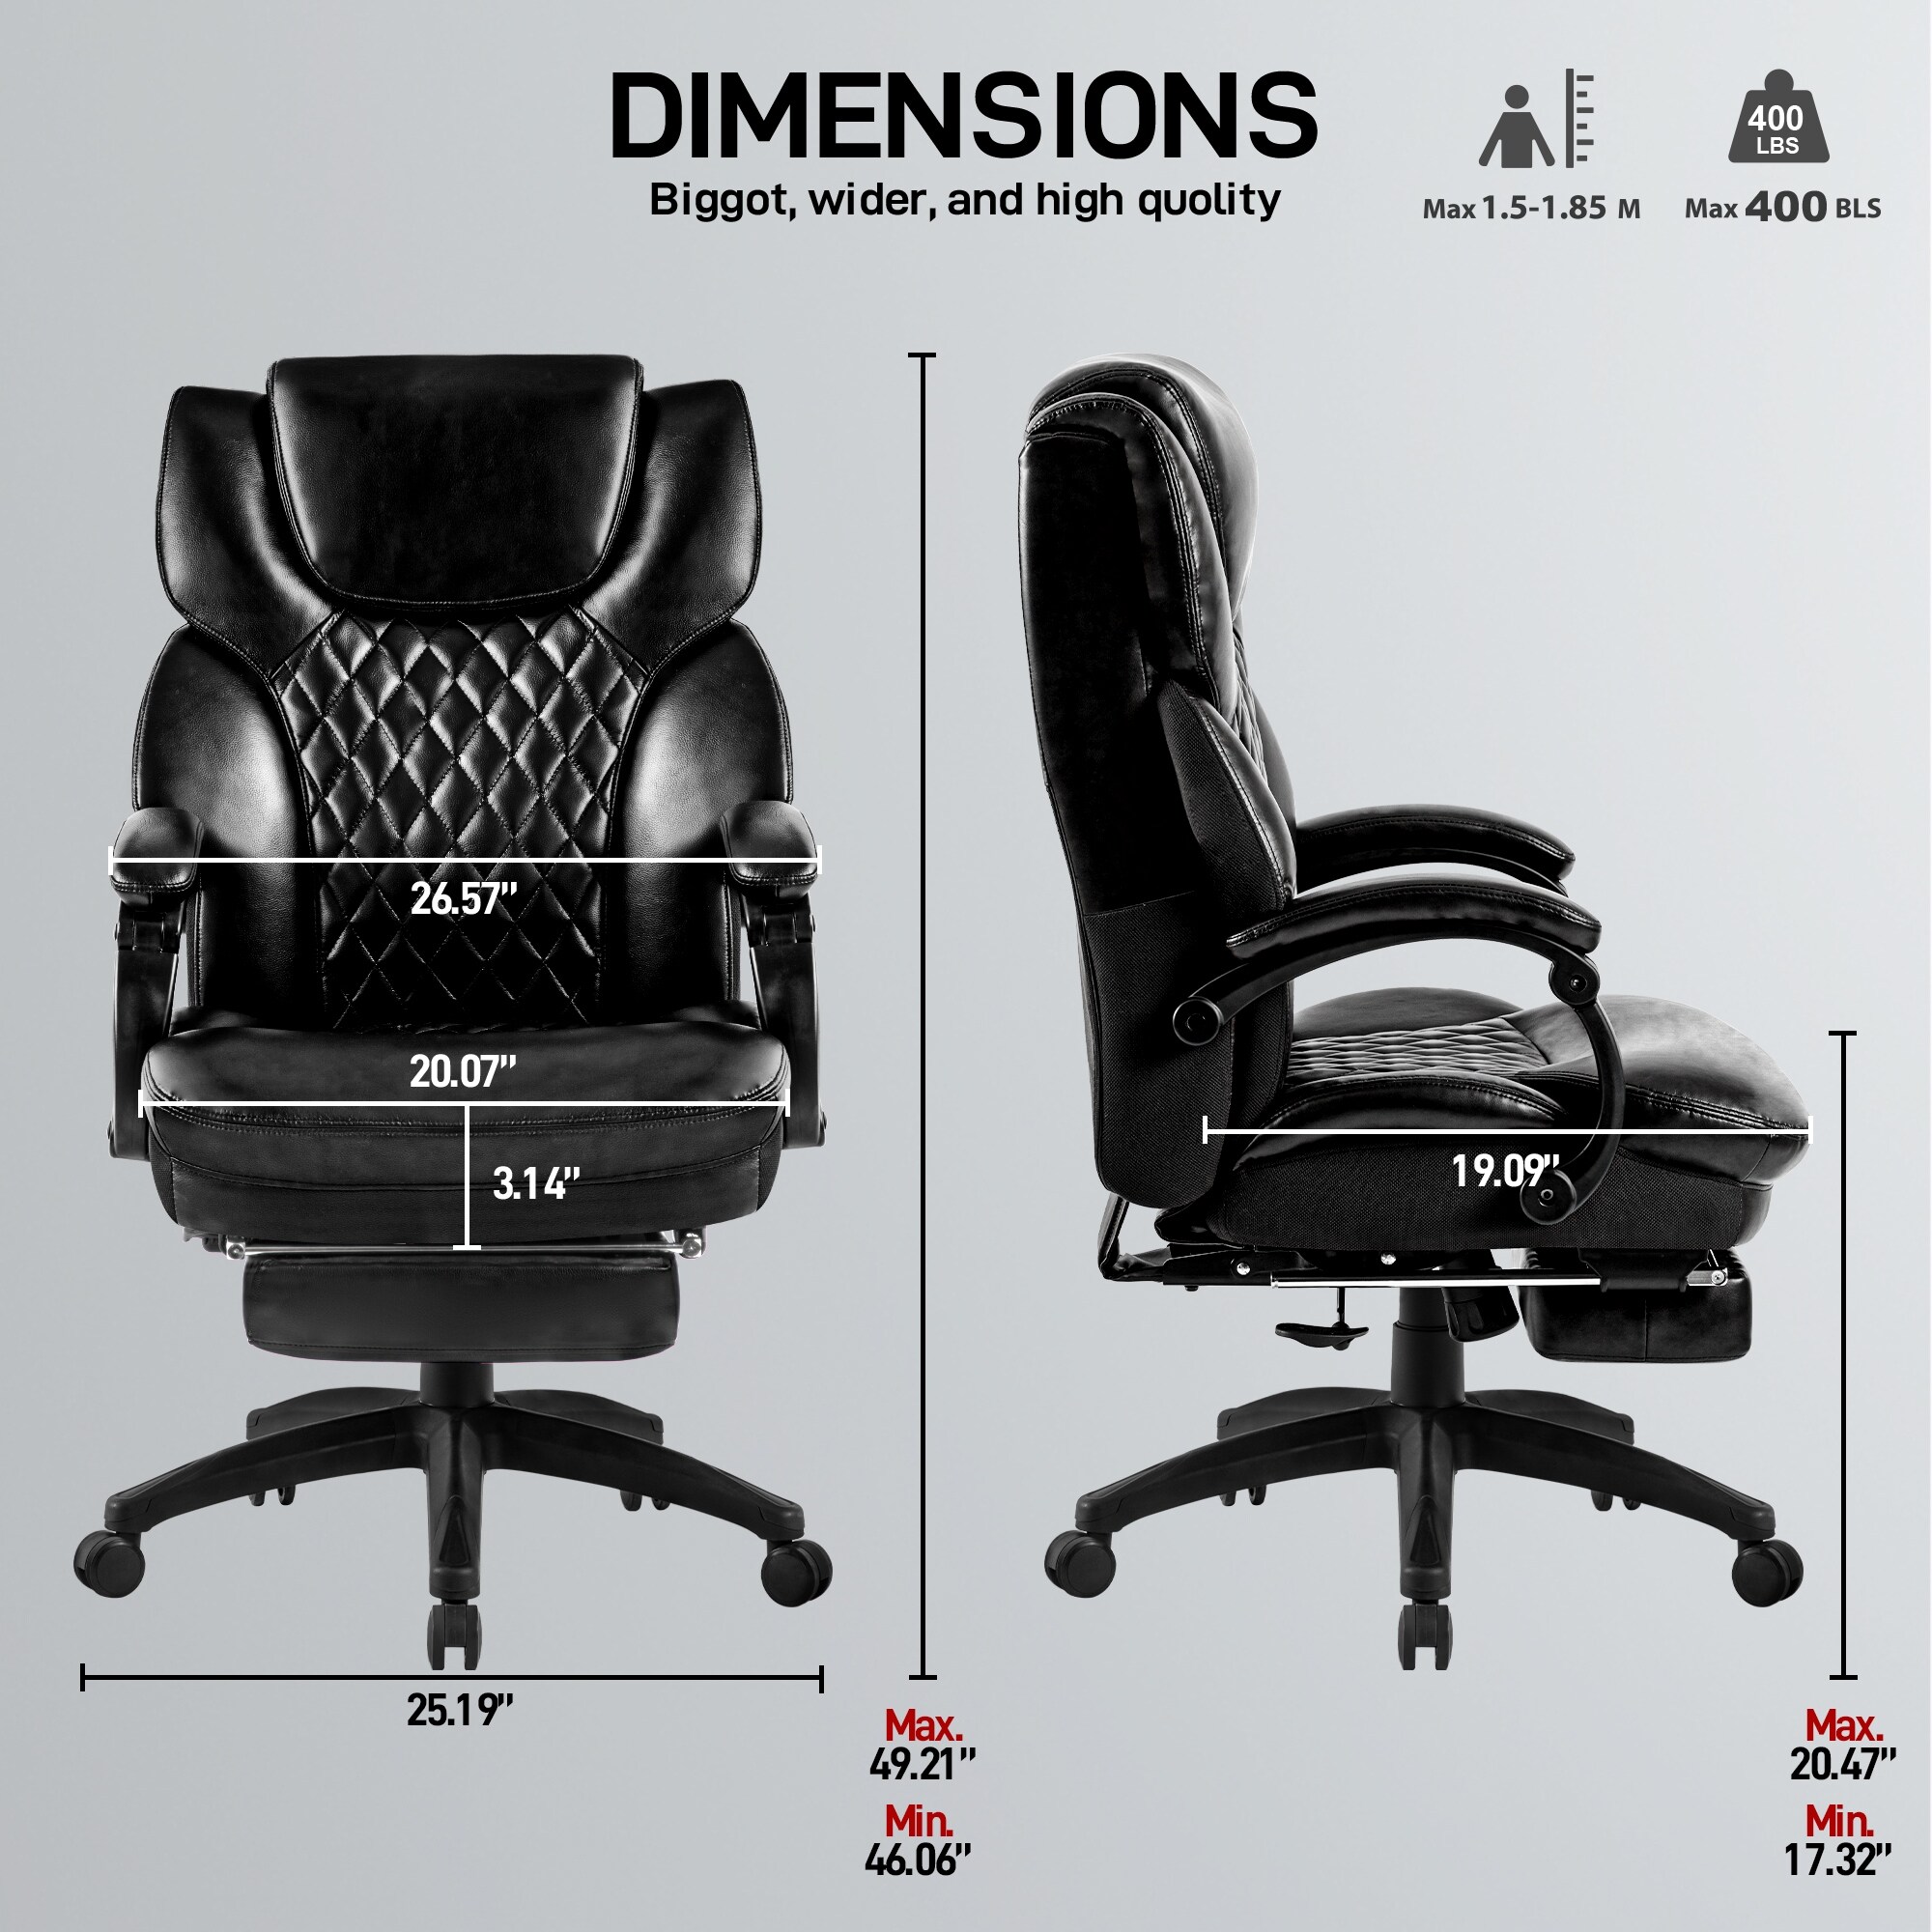 https://ak1.ostkcdn.com/images/products/is/images/direct/e5772d27208512af4e0bef04a5f6fe922dc66cce/400lbs-Big-%26-Tall-Office-Chair%2C-Heavy-Duty-Office-Executive-Swivel-Chair.jpg